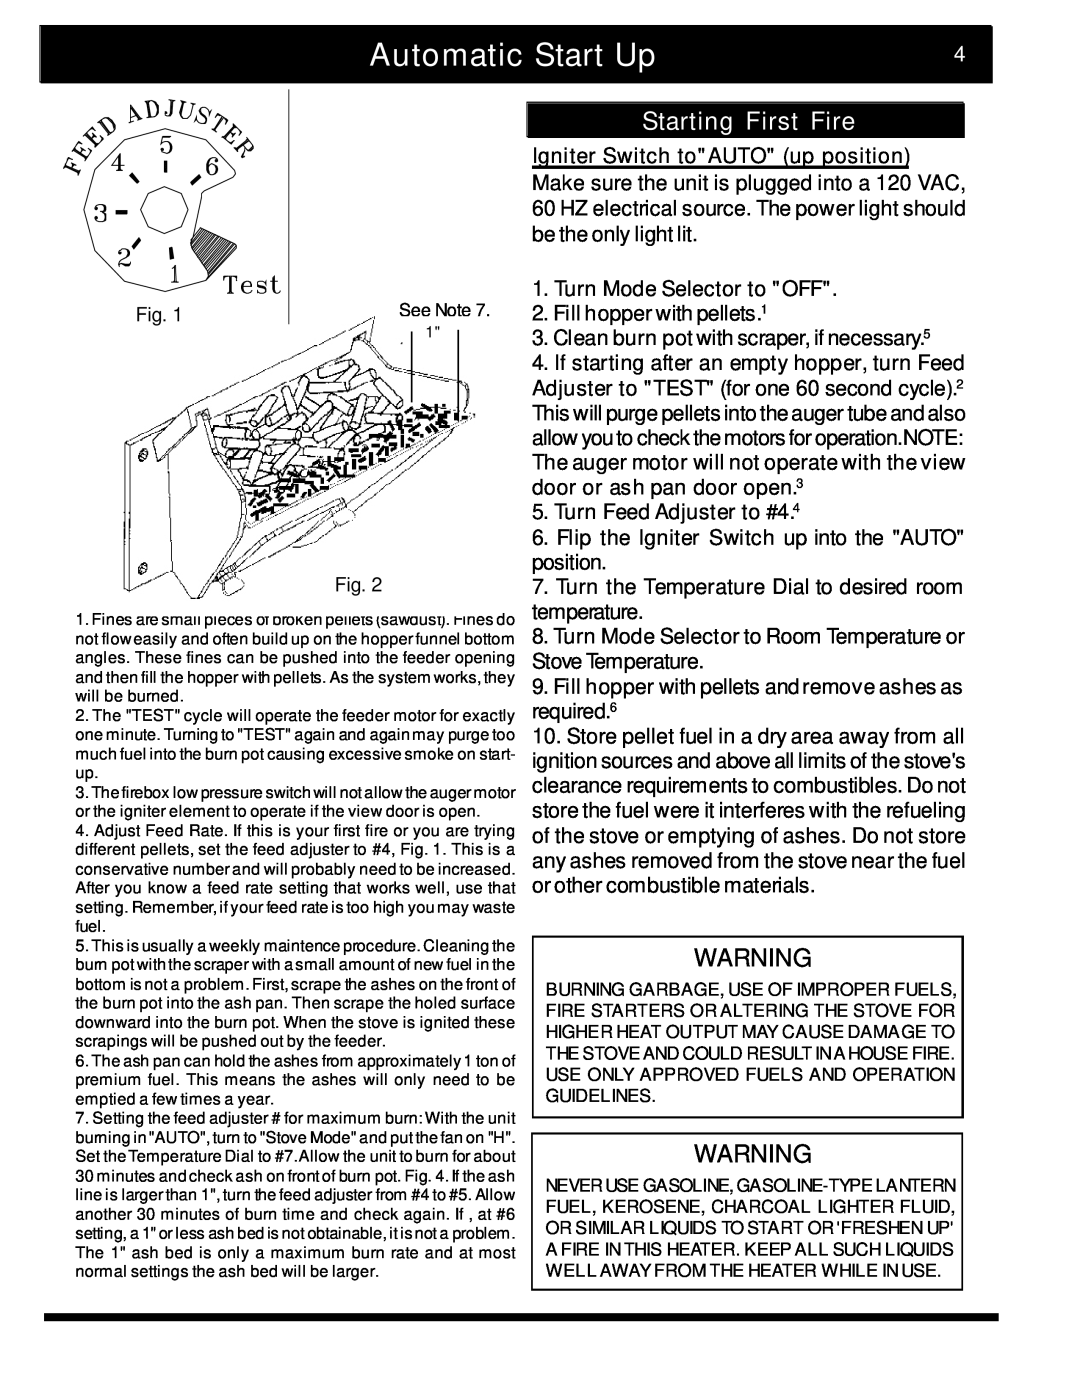 Harman Stove Company The Harman Accentra Pellet Insert manual Automatic Start Up, Starting First Fire 